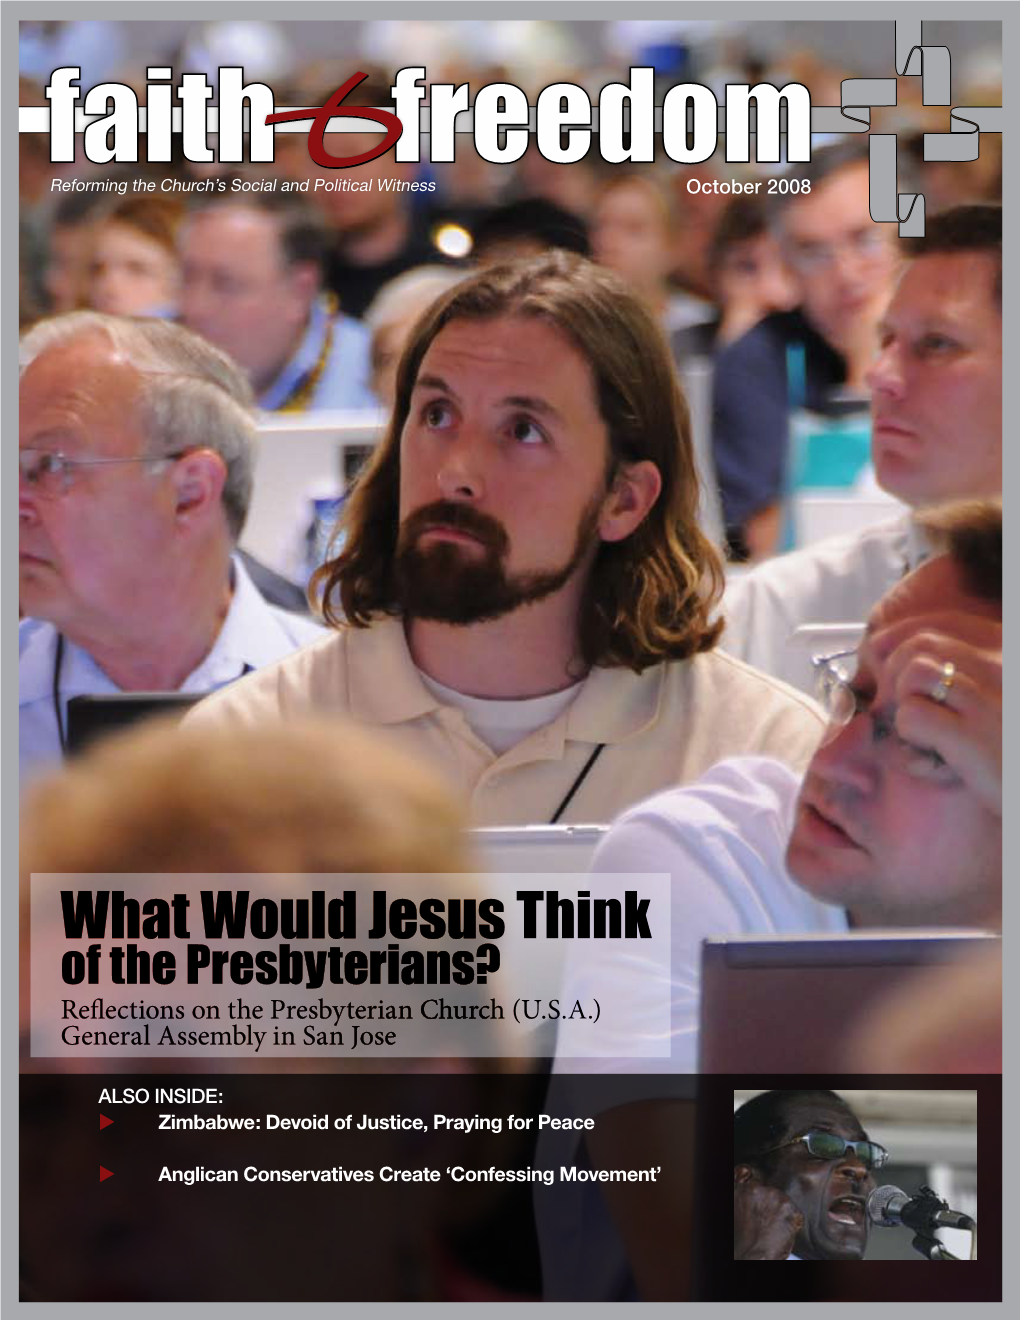 What Would Jesus Think of the Presbyterians? Reflections on the Presbyterian Church (U.S.A.) General Assembly in San Jose